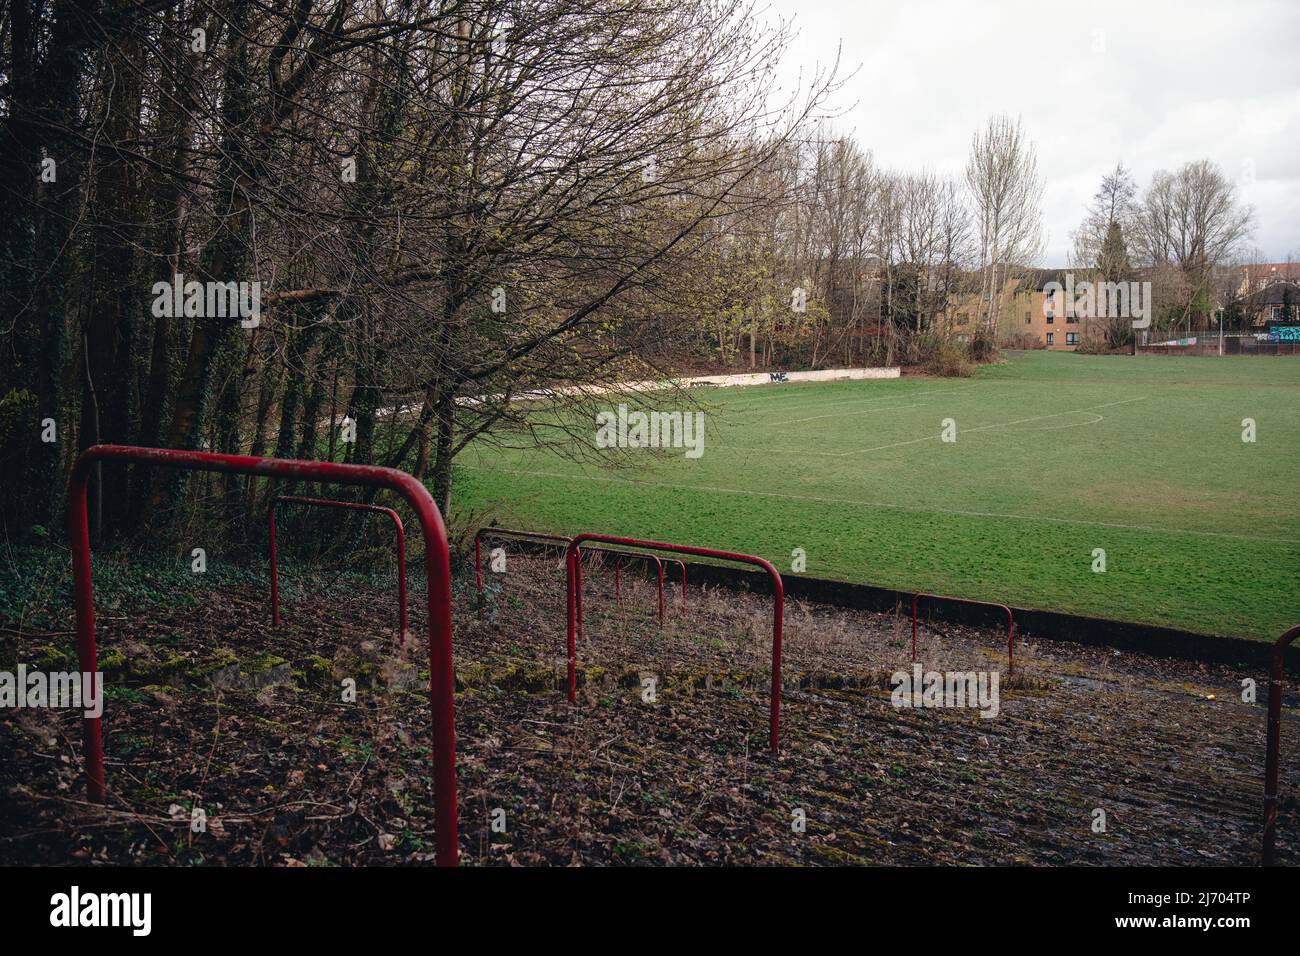 Cathkin Park is a football ground in the Crosshill area of Glasgow, Scotland. It was the home ground of Third Lanark from their foundation in 1872 unt Stock Photo